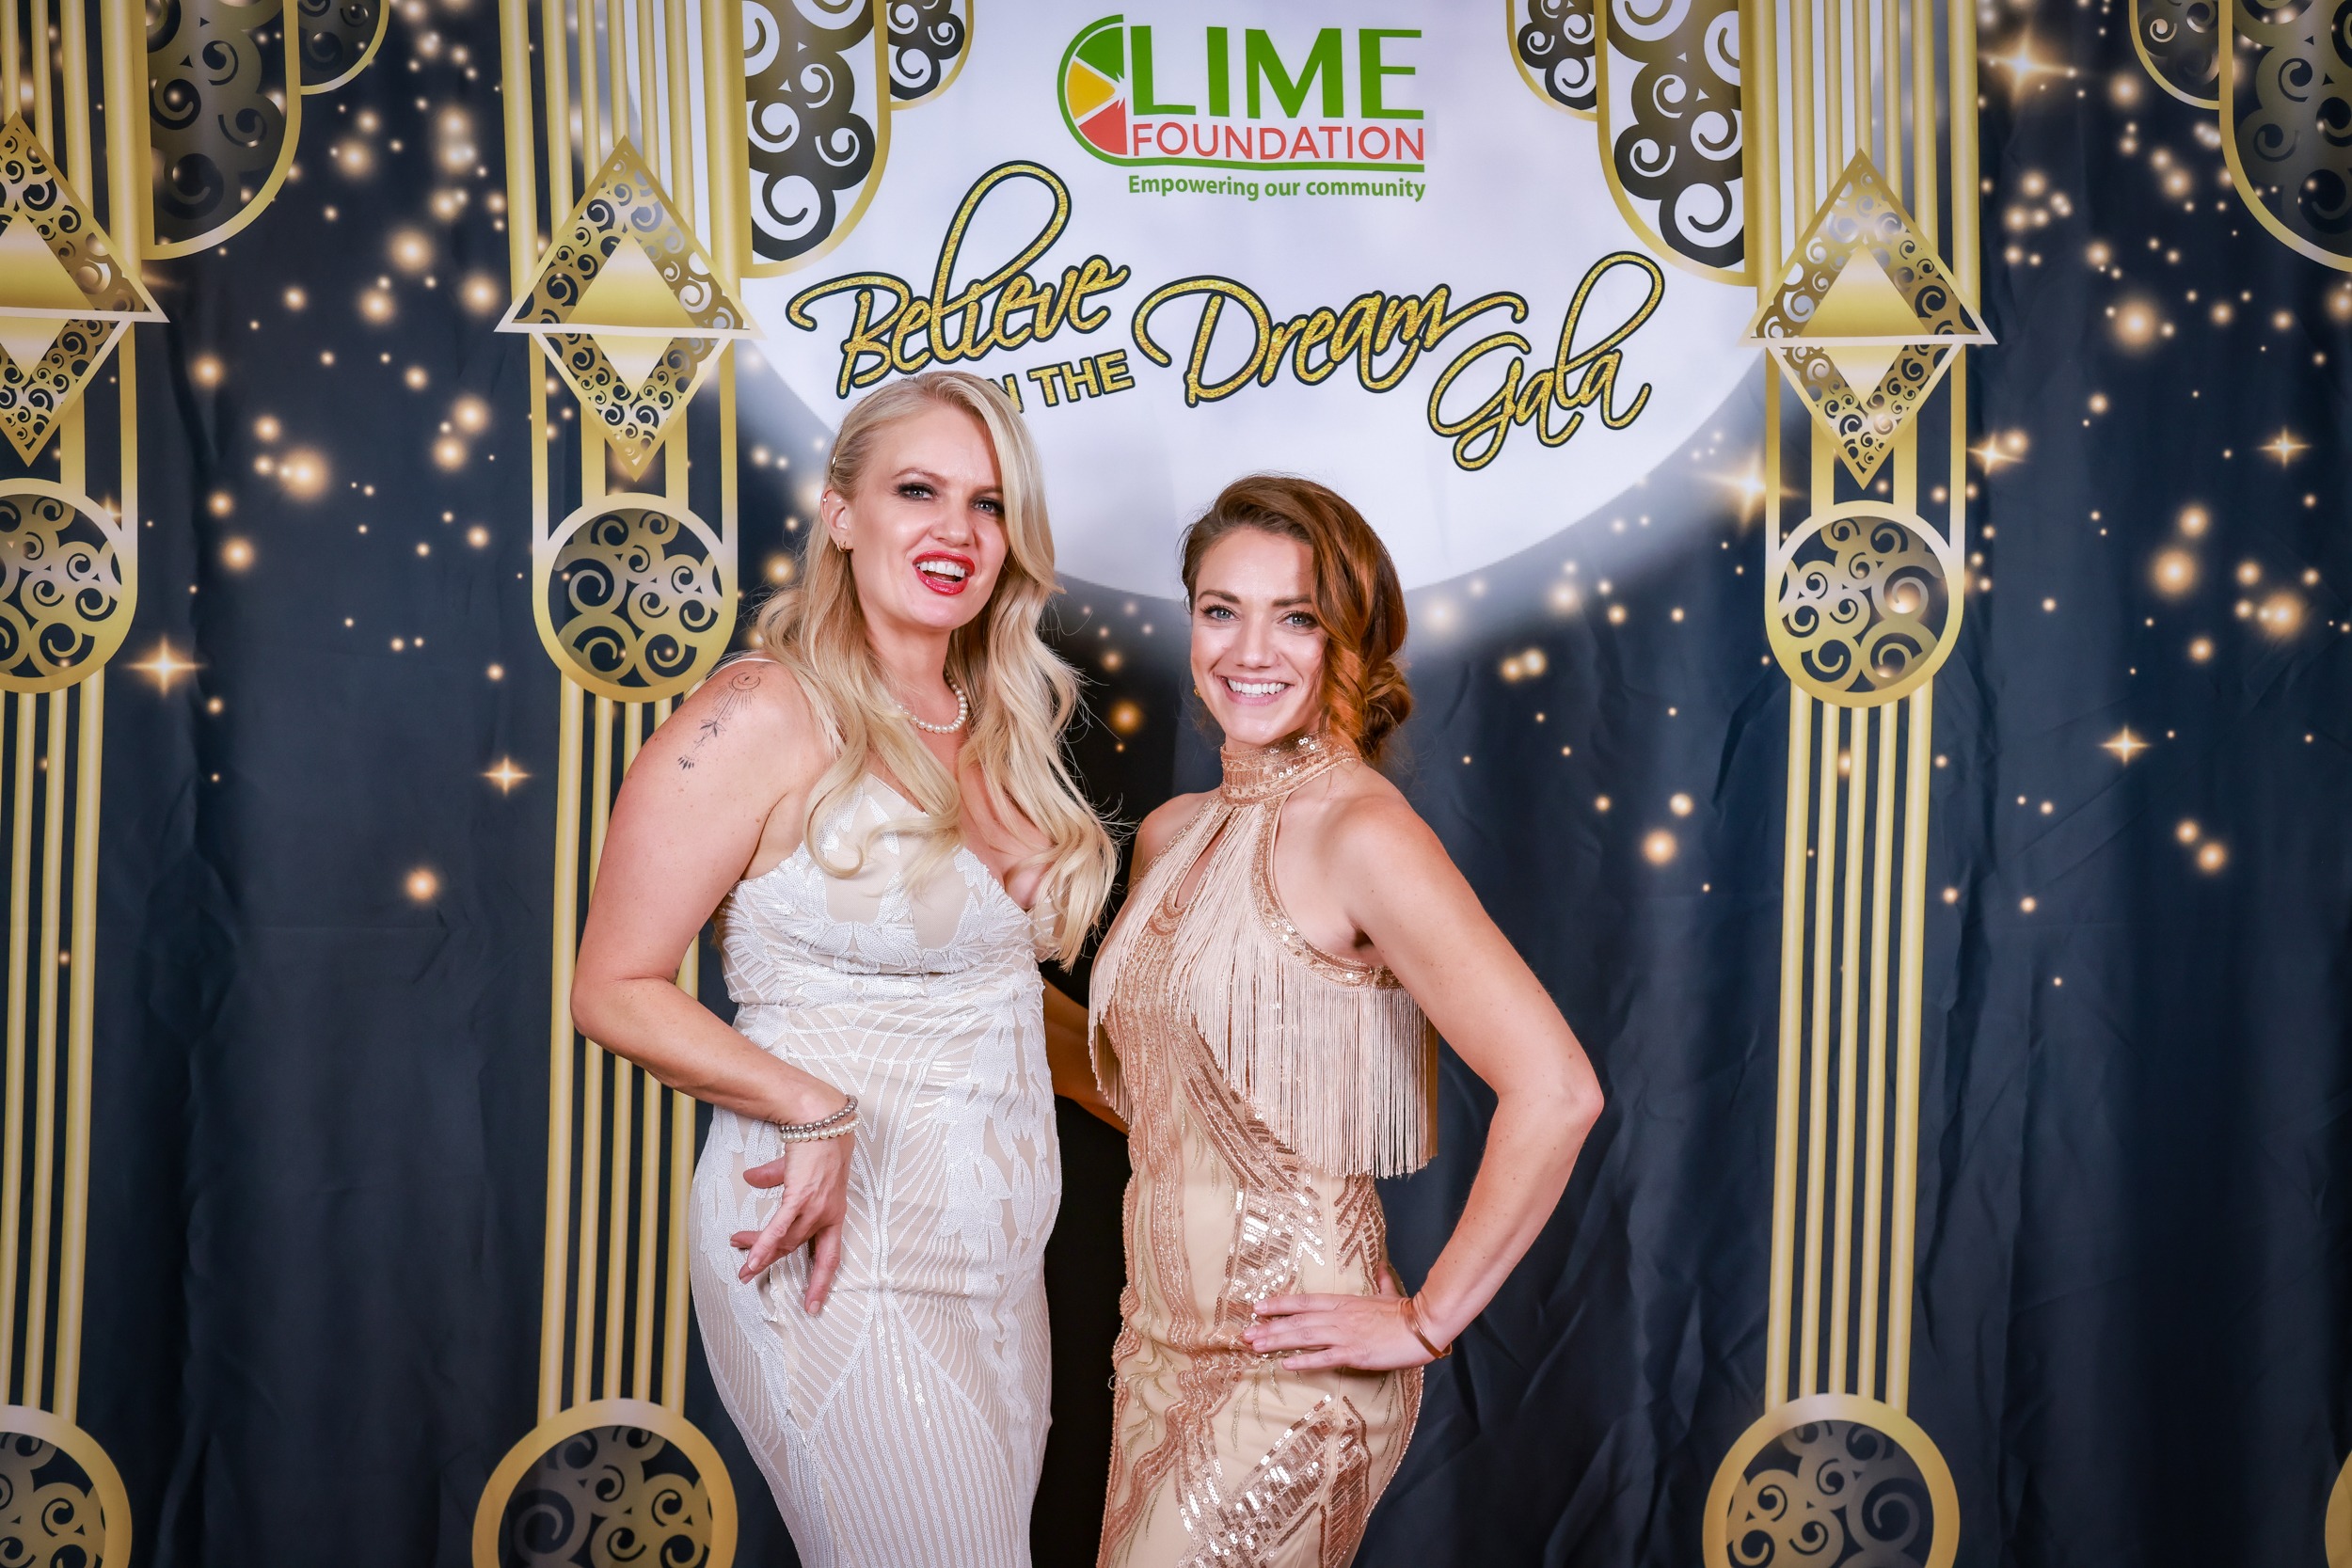 Two women posing for a photo at a Gatsby themed party hosted by The LIME Foundation.